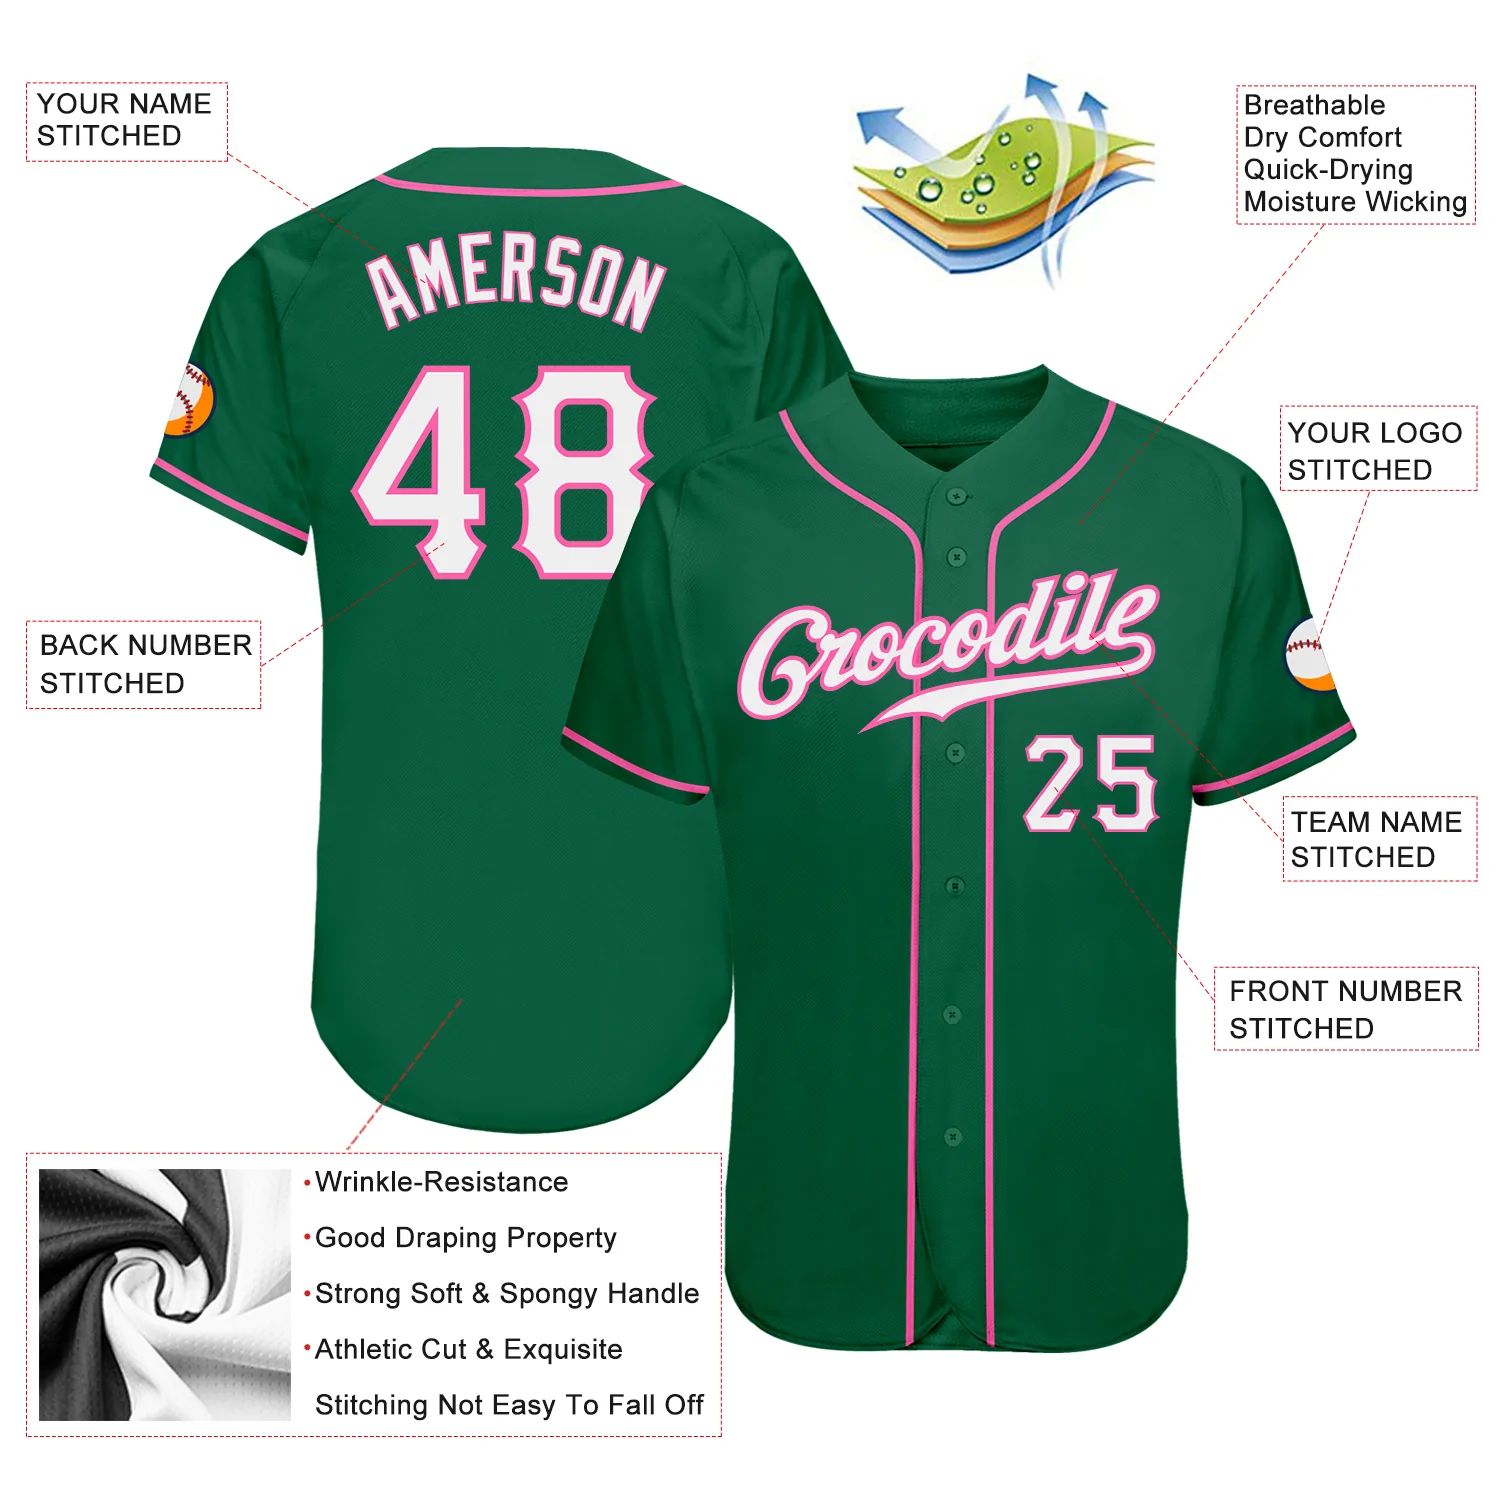 build-pink-kelly-green-baseball-white-jersey-authentic-kellygreen0083-online-3.jpg